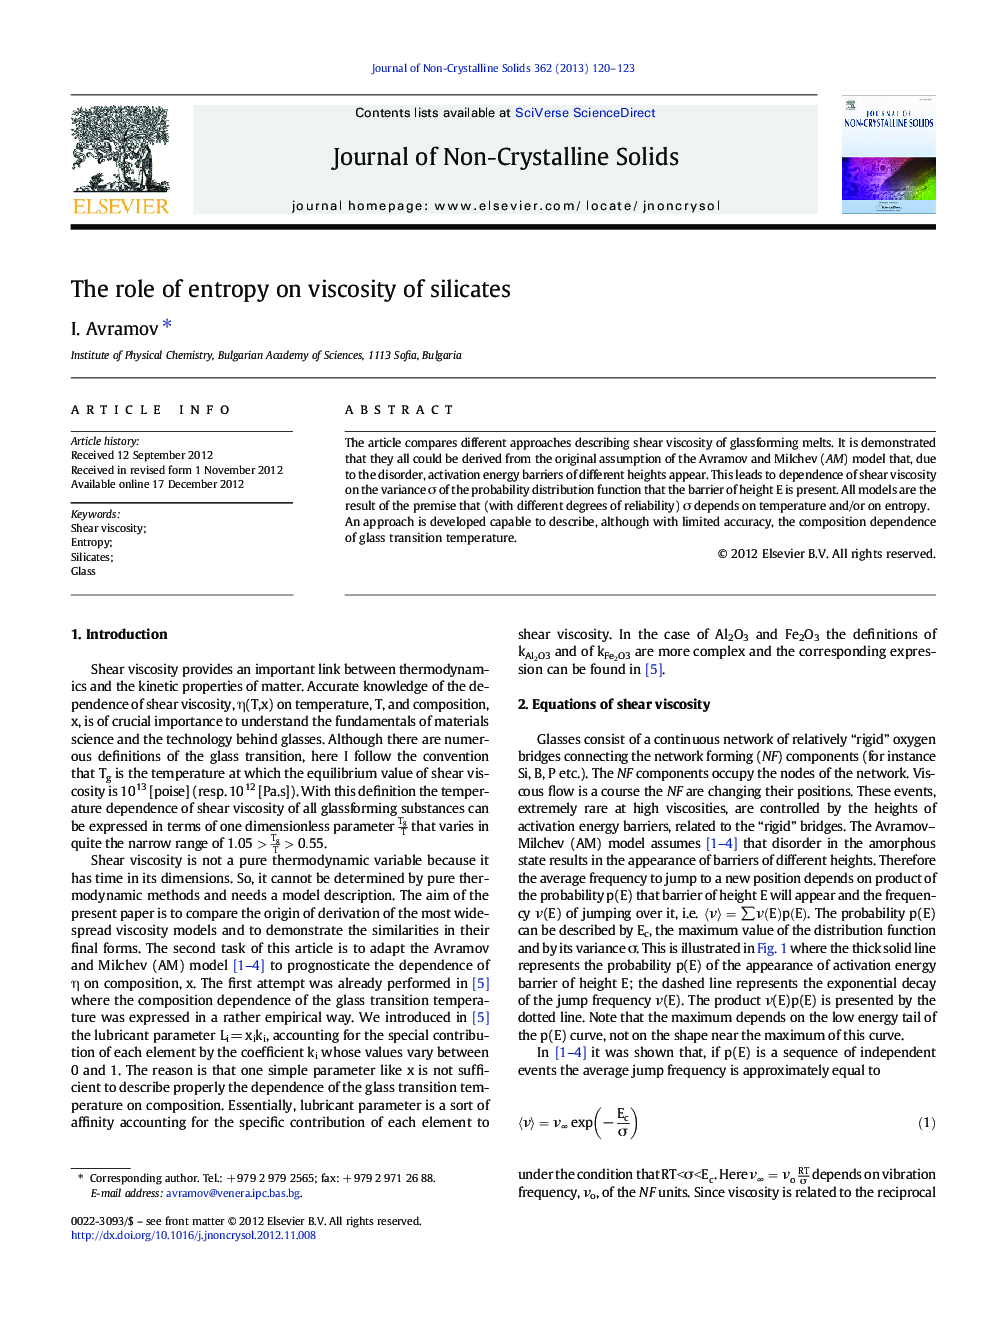 The role of entropy on viscosity of silicates